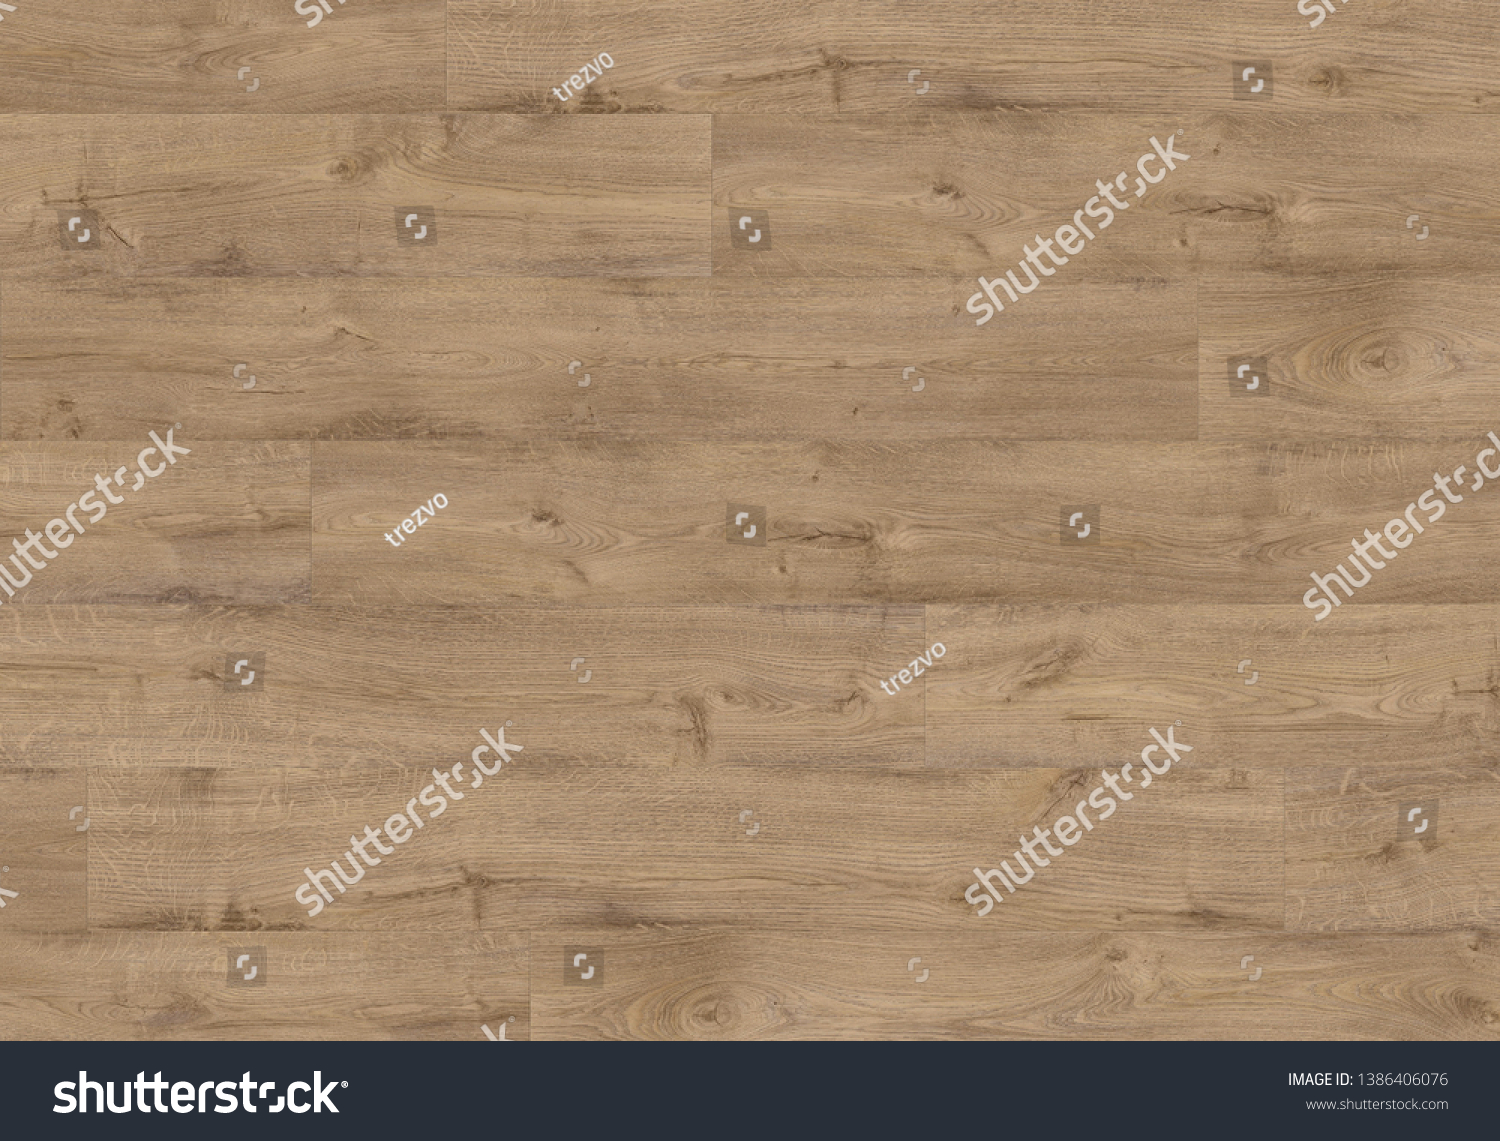 Wood texture background. Wooden floor or table with natural pattern #1386406076